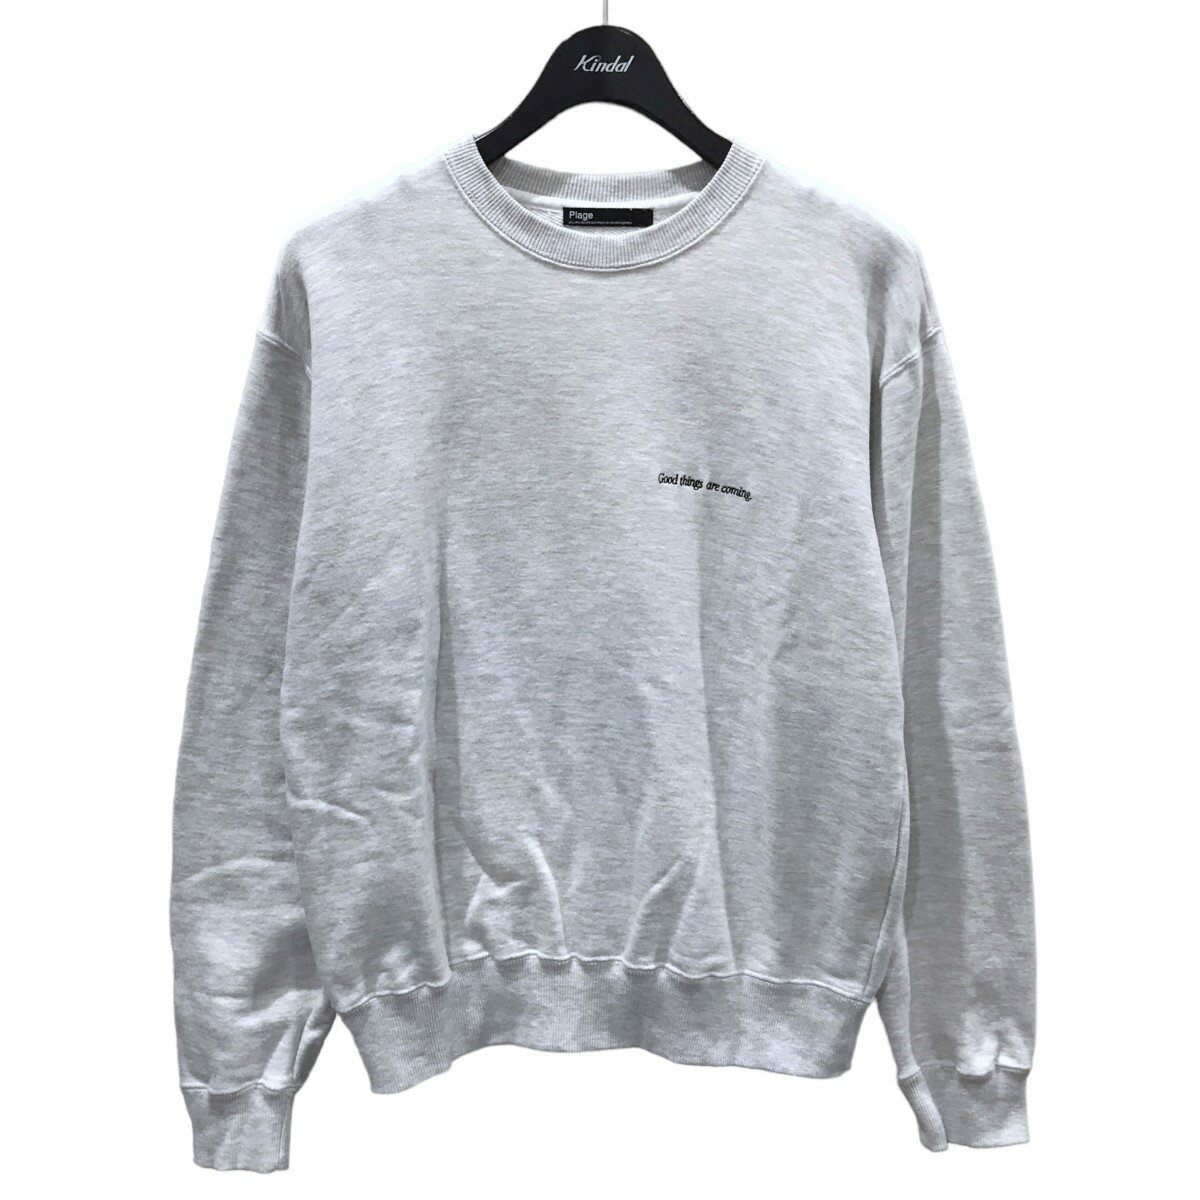   Plage@23AW hJXEFbgg[i[ embroidery sweat shirts Good things are coming O[ TCYFt[TCY  230424  v[W 